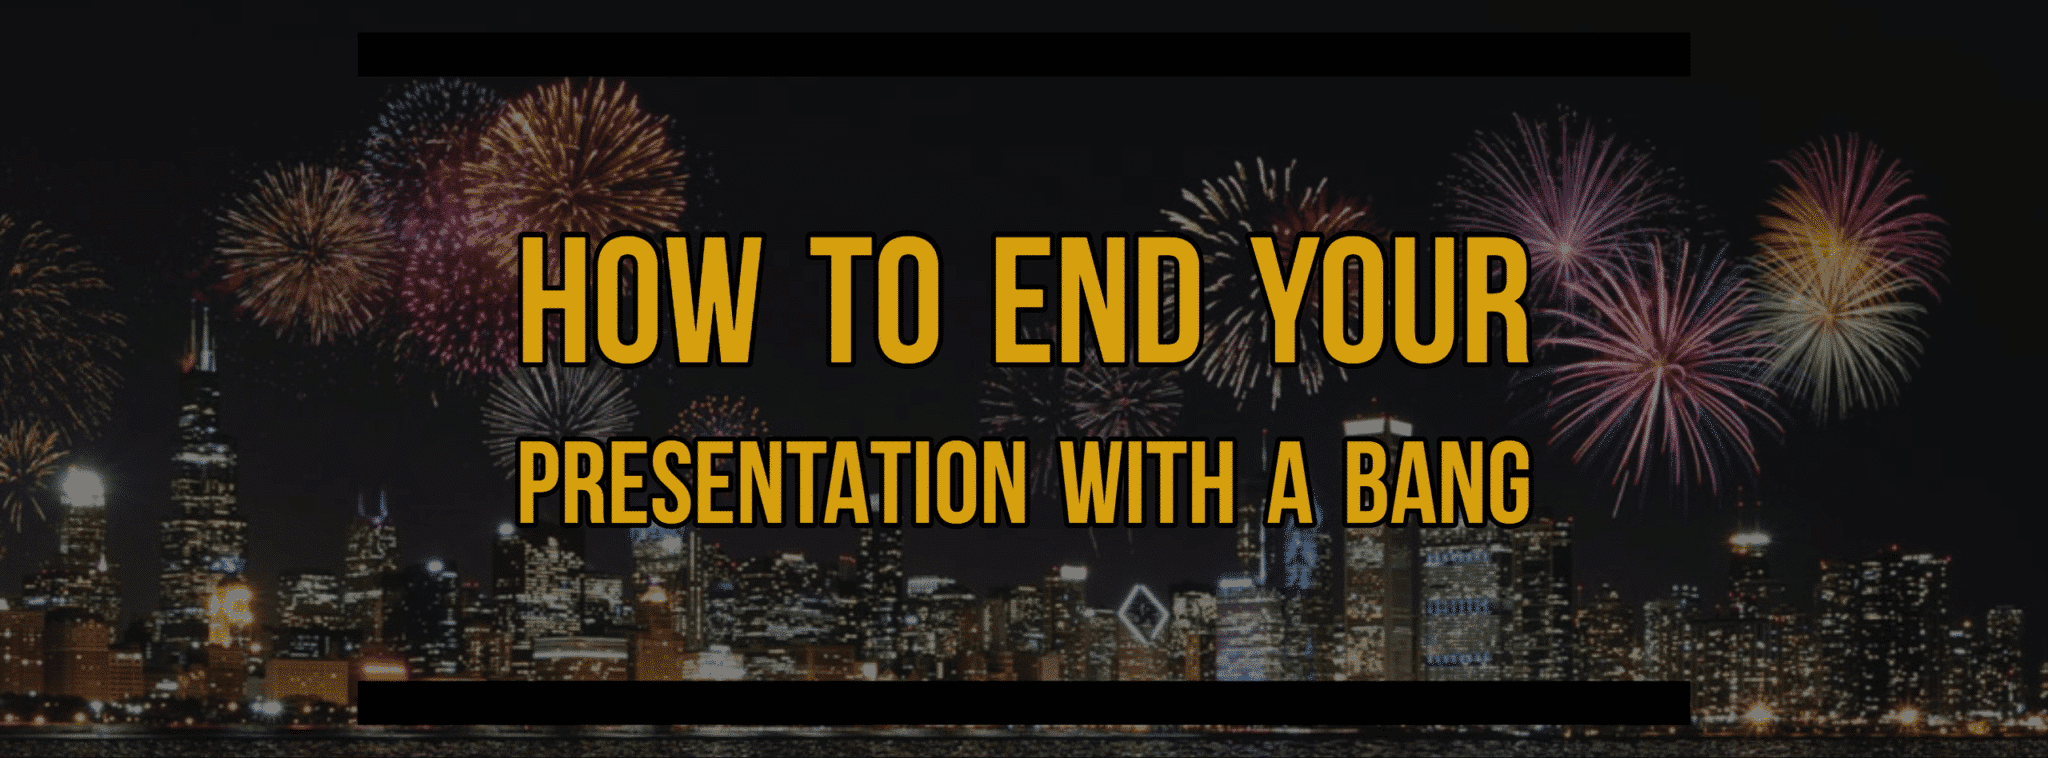 how to end your presentation with a bang